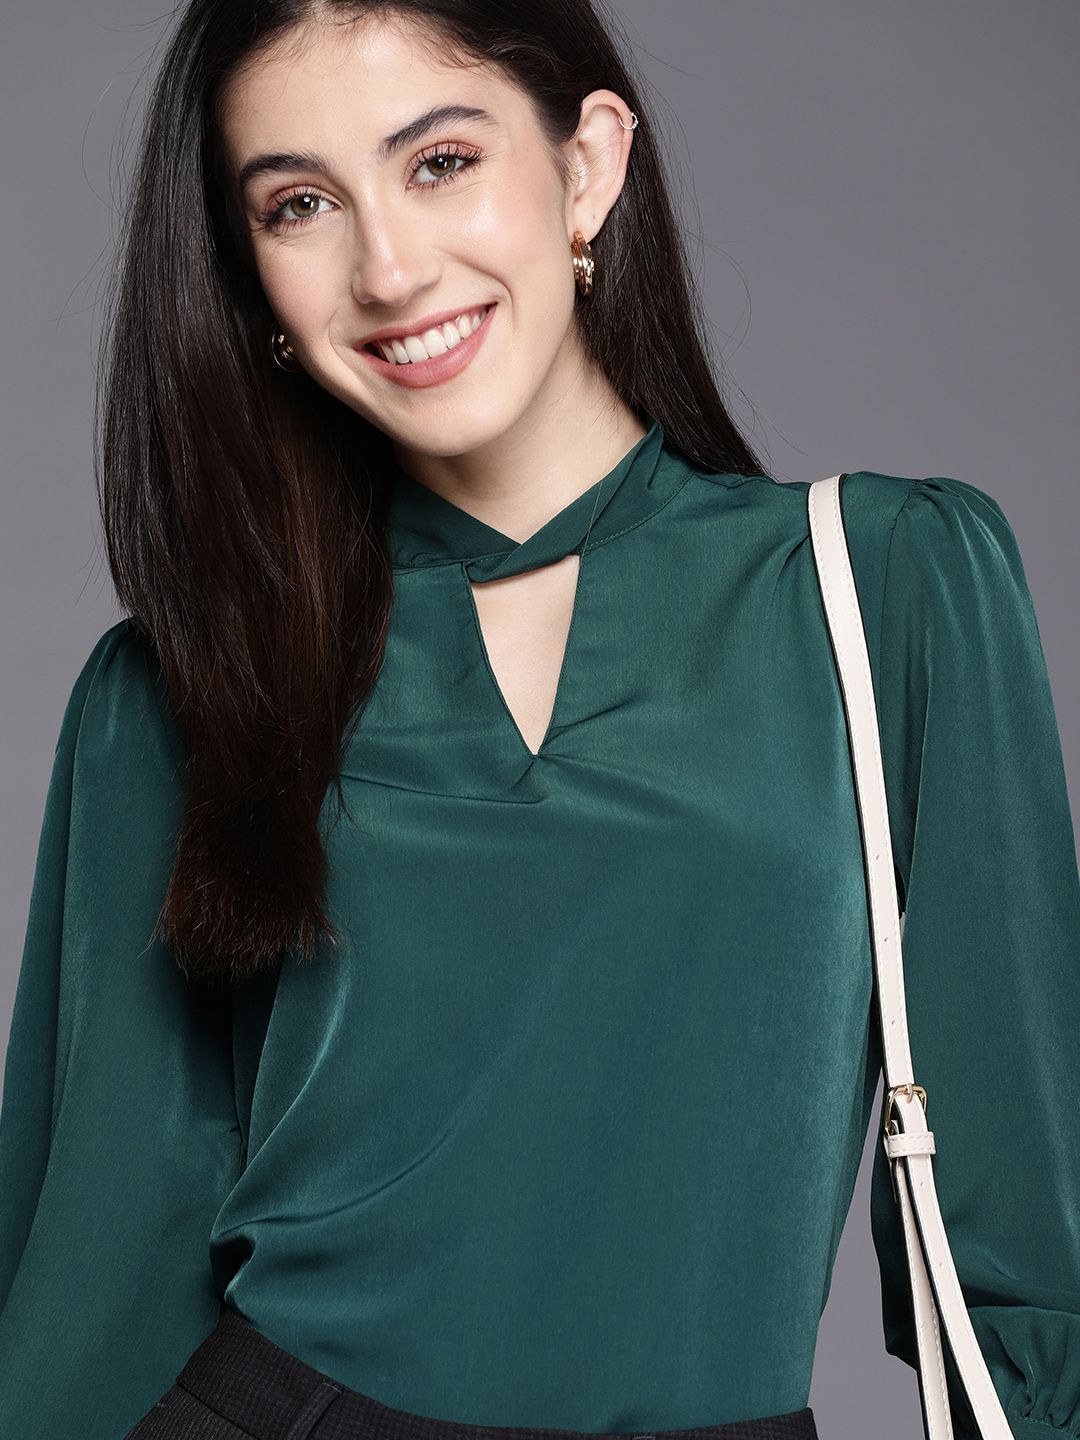 Allen Solly Woman Green Solid Key-hole Neck Top Price in India